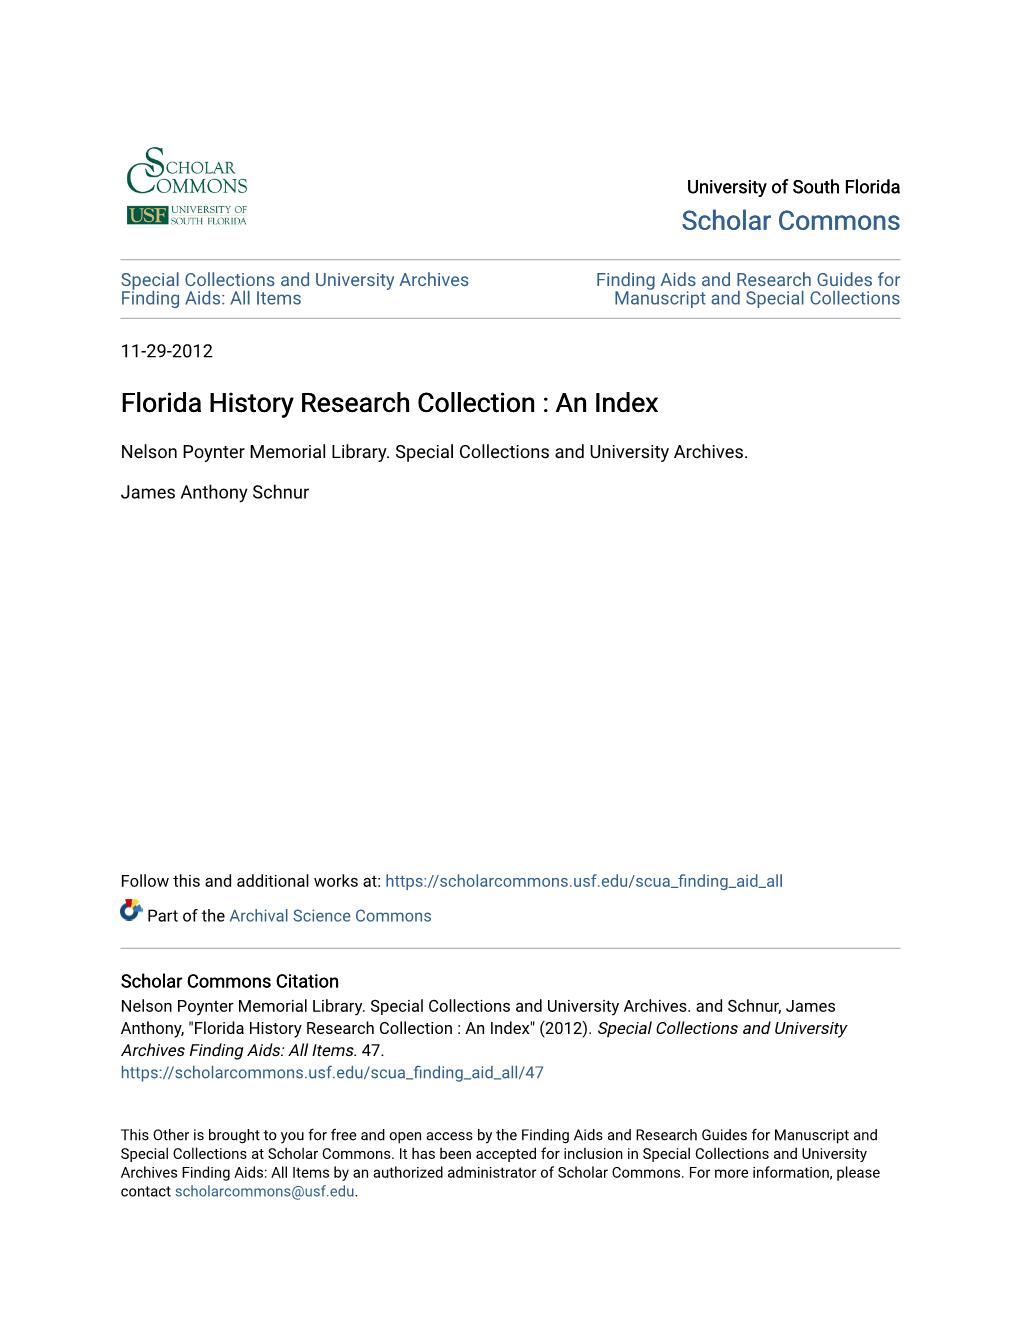 Florida History Research Collection : an Index